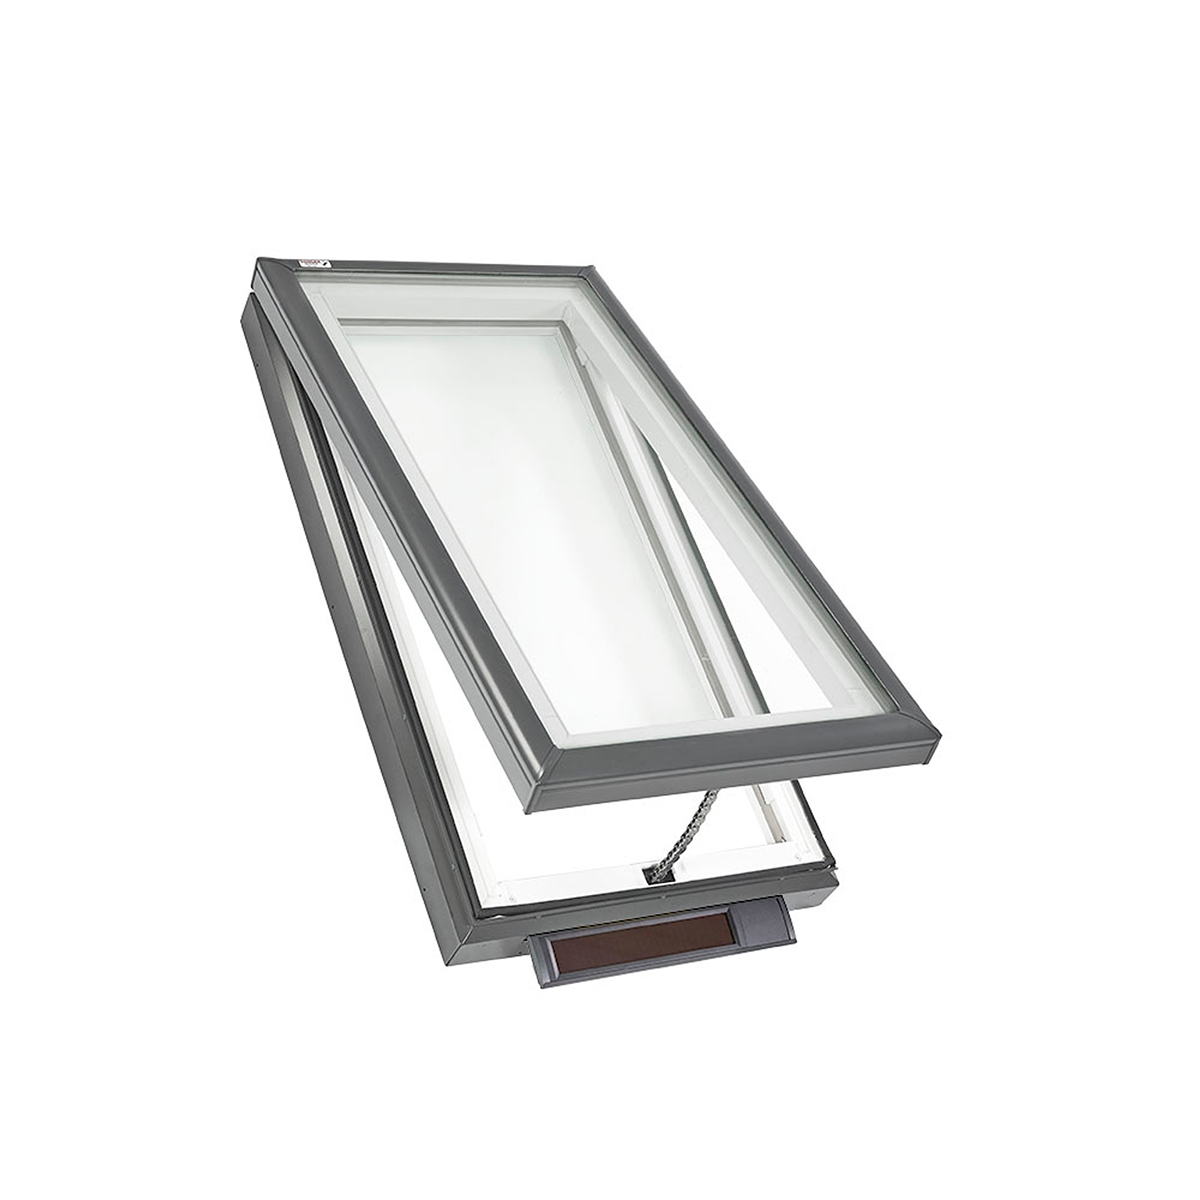 Solar Powered Curb-Mount Skylight with Laminated Low-E3 Glass - 30-1/2 in. x 30-1/2 in. - VCS 3030